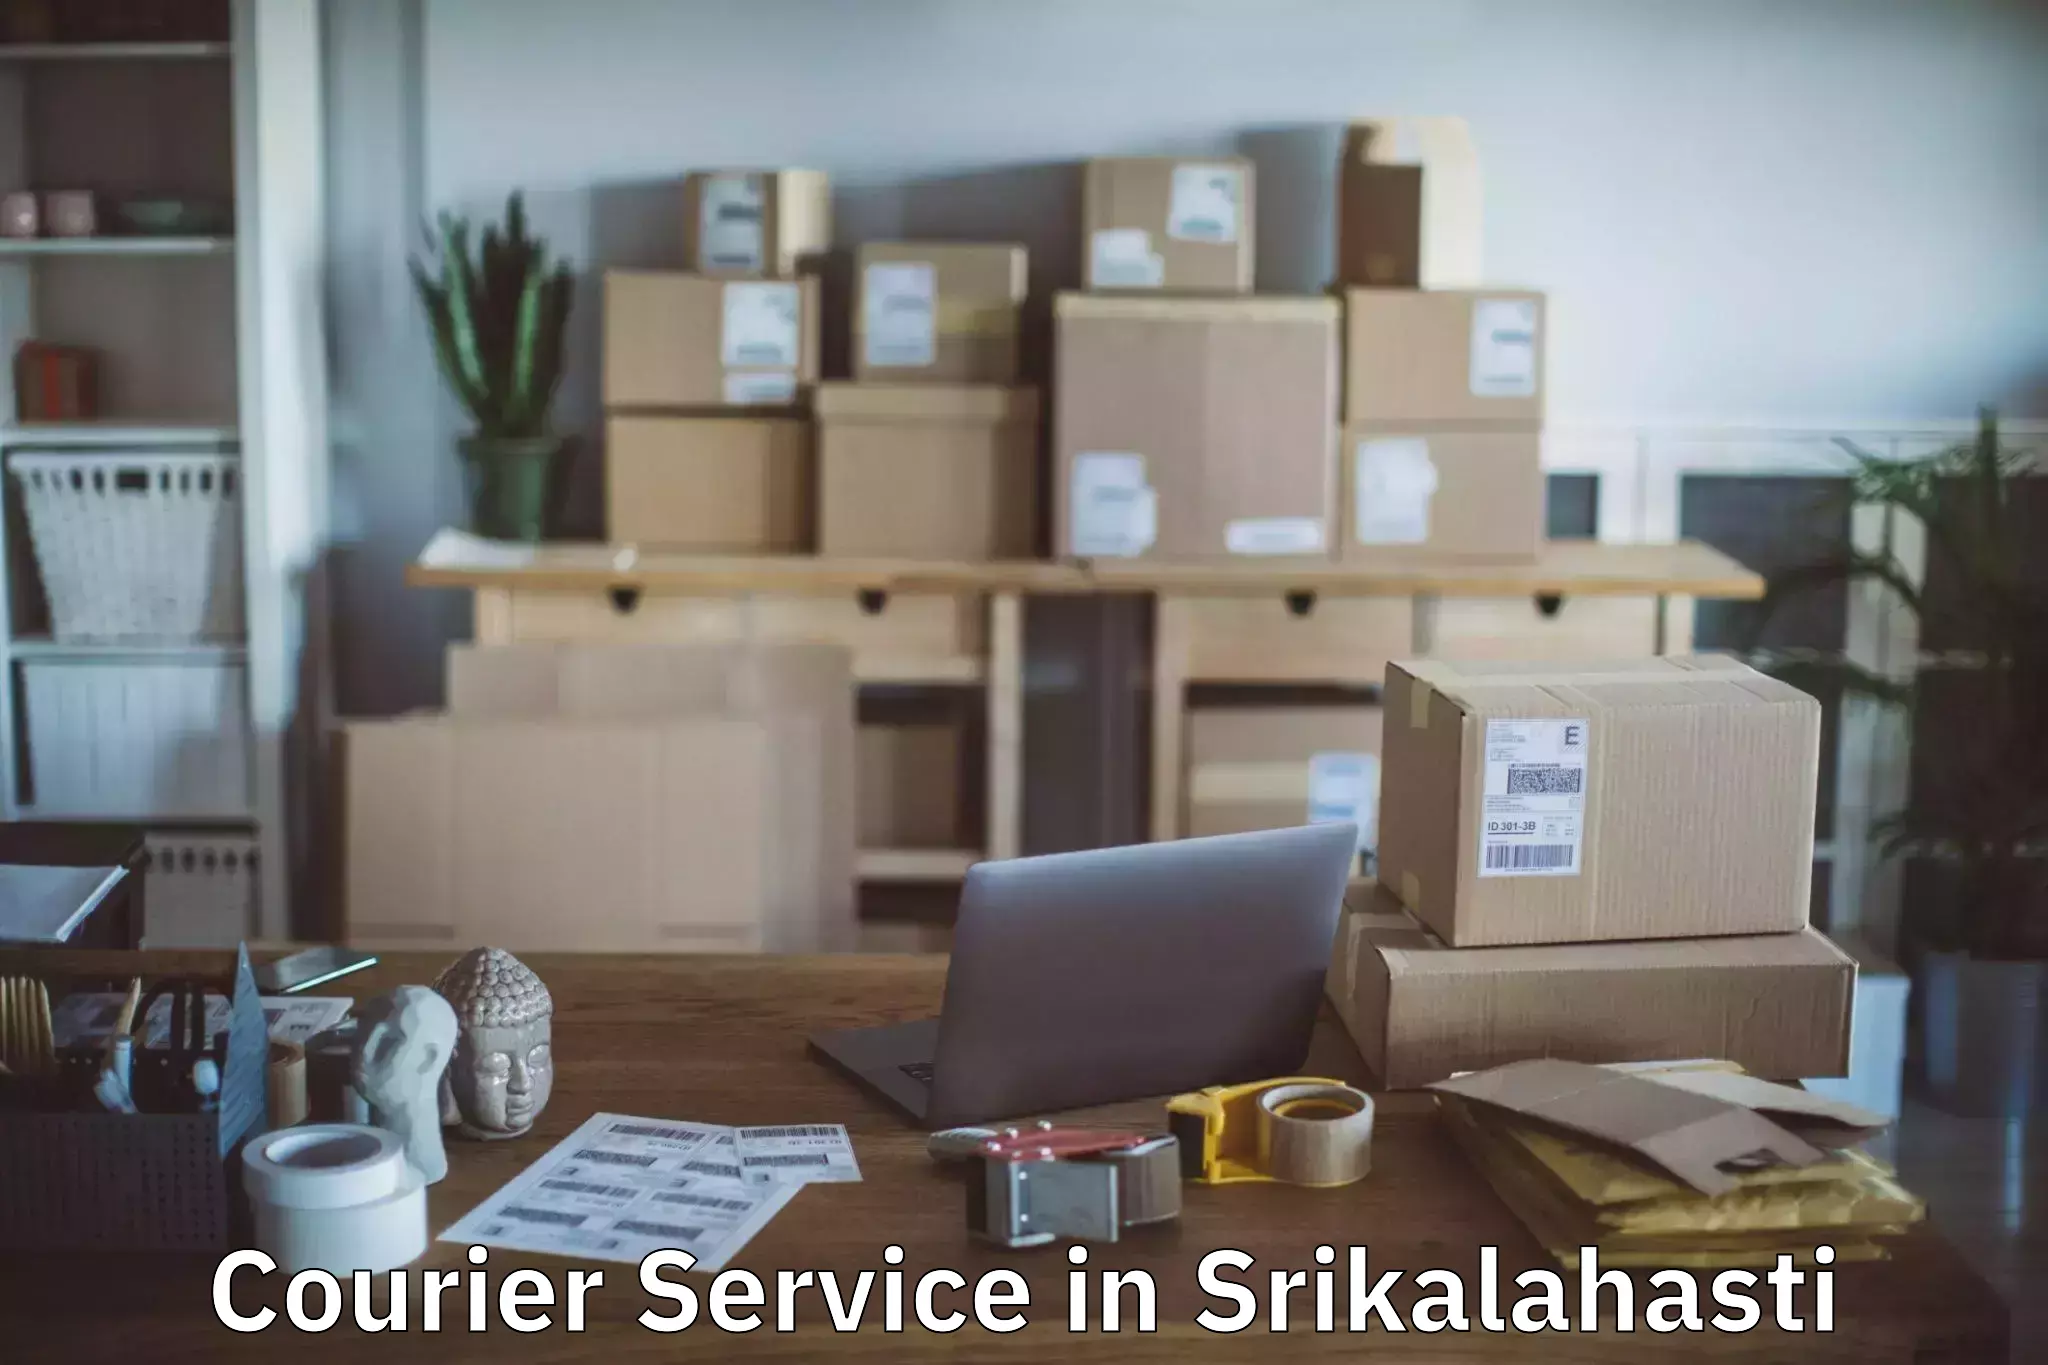 Efficient package consolidation in Srikalahasti